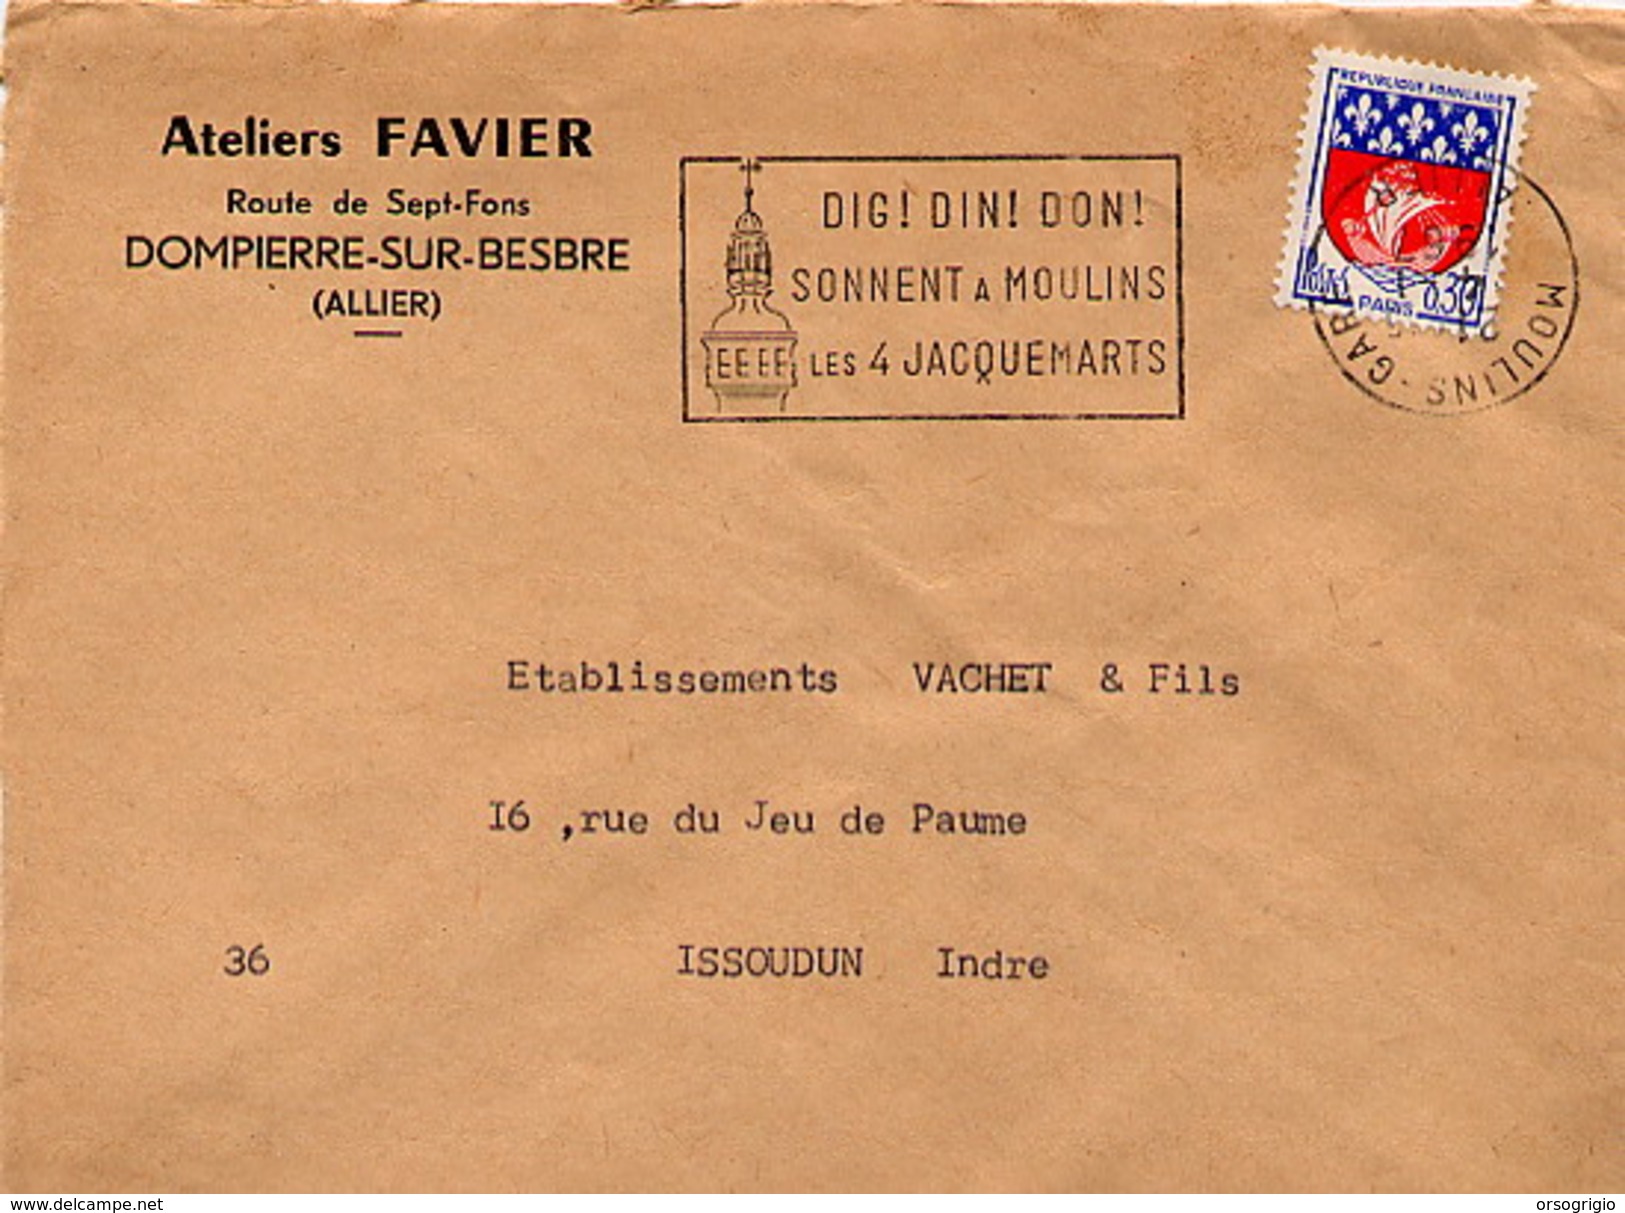 FRANCE -  MOULINS 1967 - DIG ! DIN ! DON ! SONNENT LES 4 JACQUEMARTS - TIMBRO DATARIO CAPOVOLTO !!!!!!!!!!!!!!!!!!!!!!!! - Covers & Documents